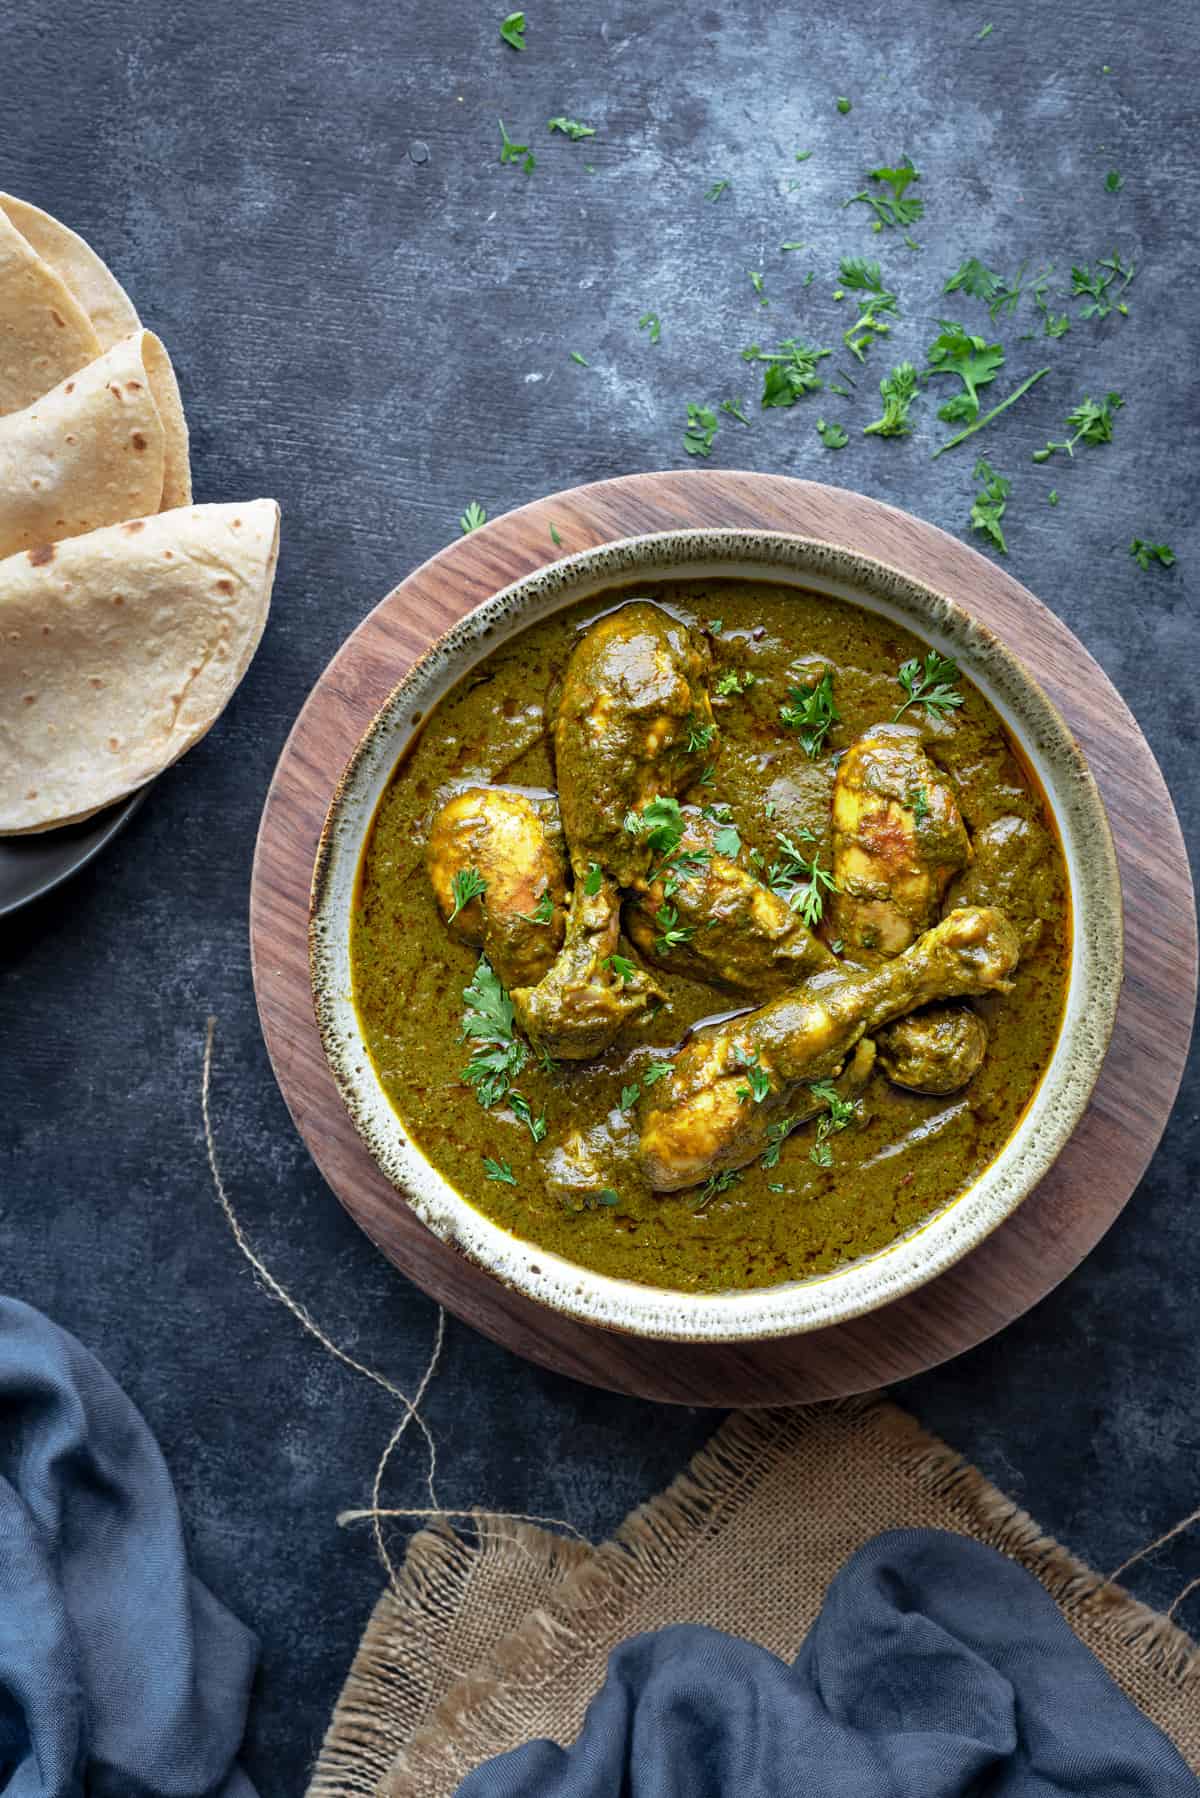 Chicken Saag wala curry served in a bowl with Indian roti bread on the side.